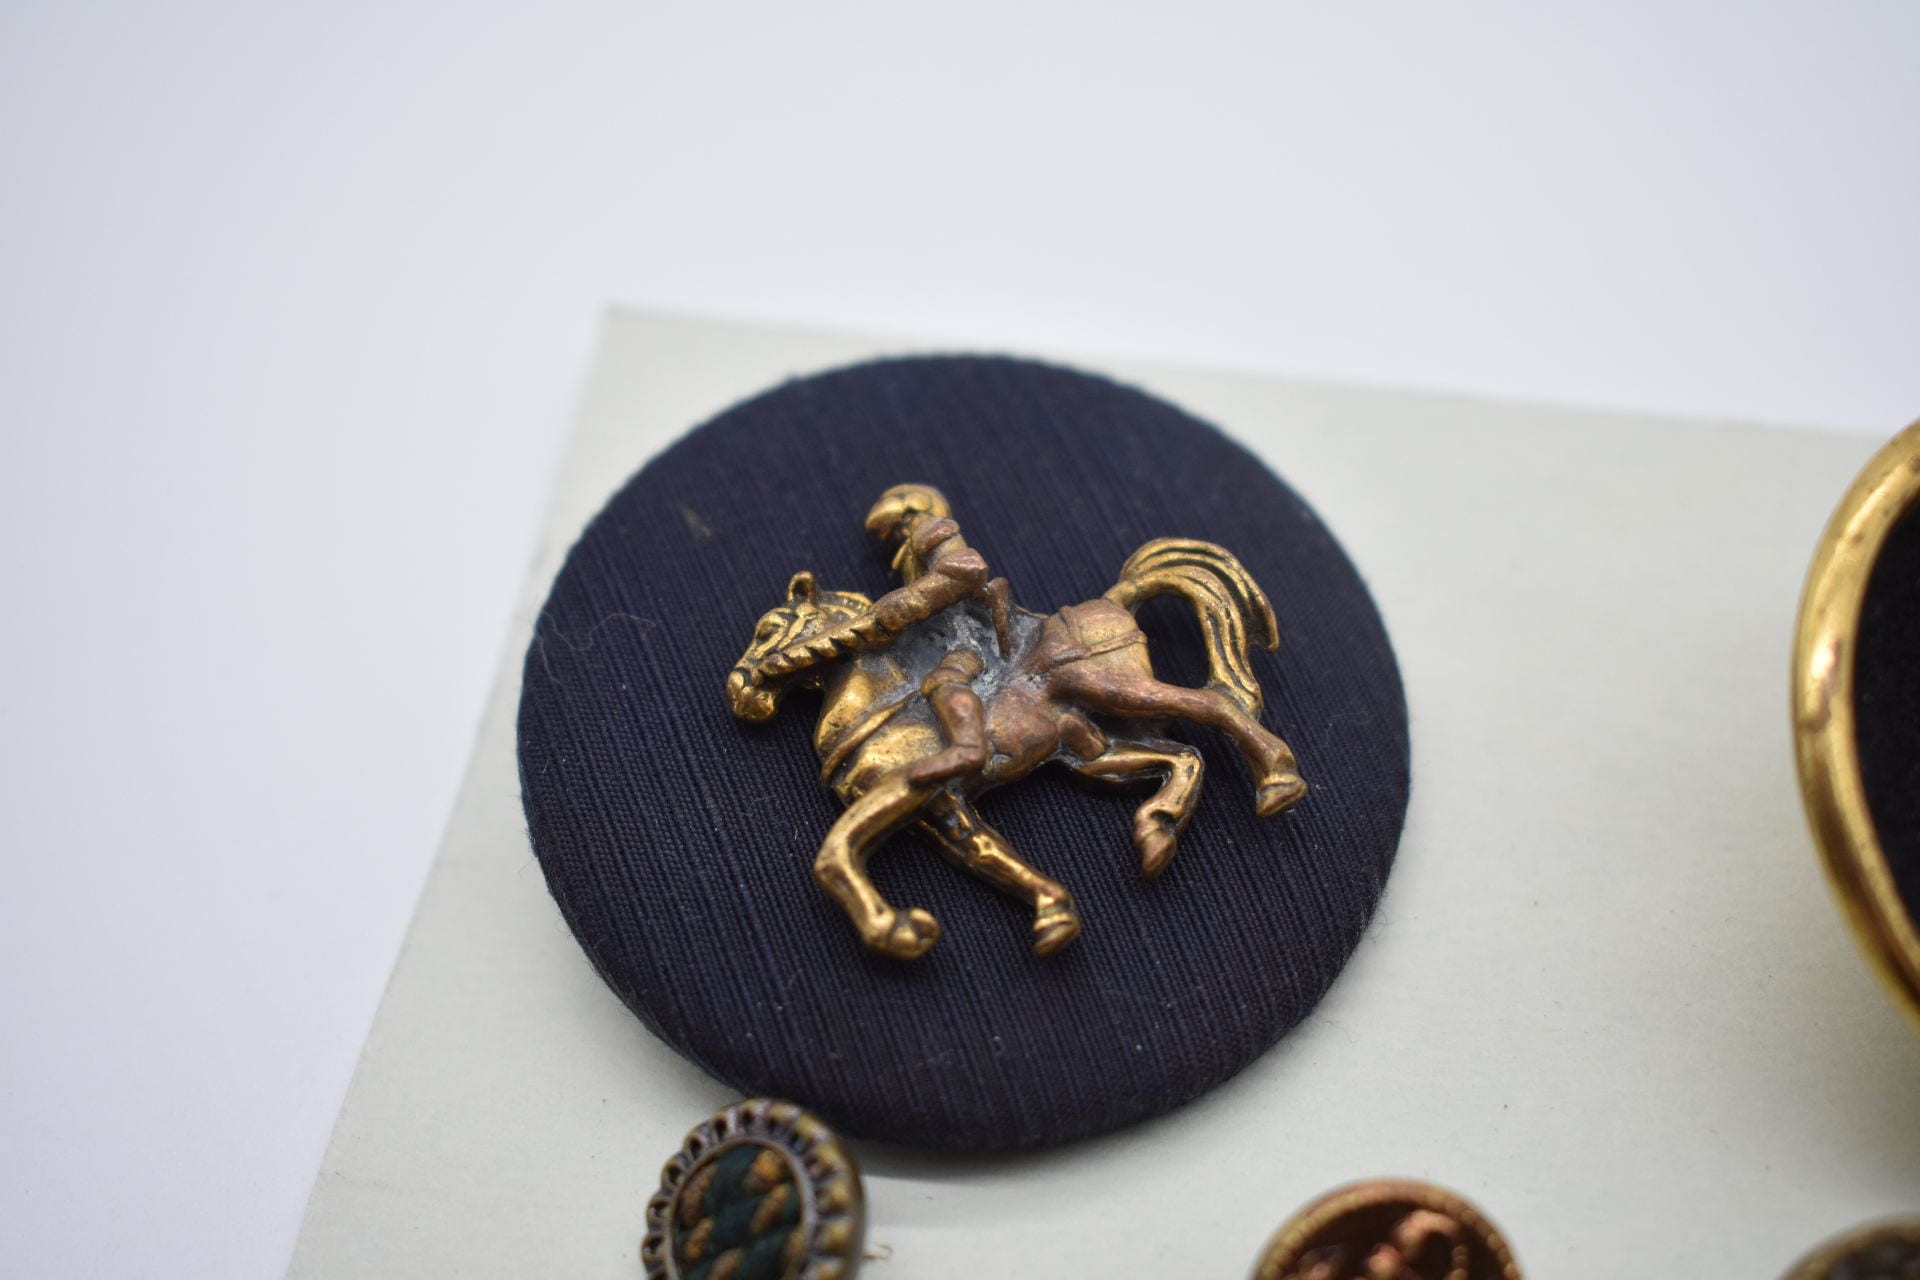 A large black and round button with a raised image of a person riding a horse in gold.